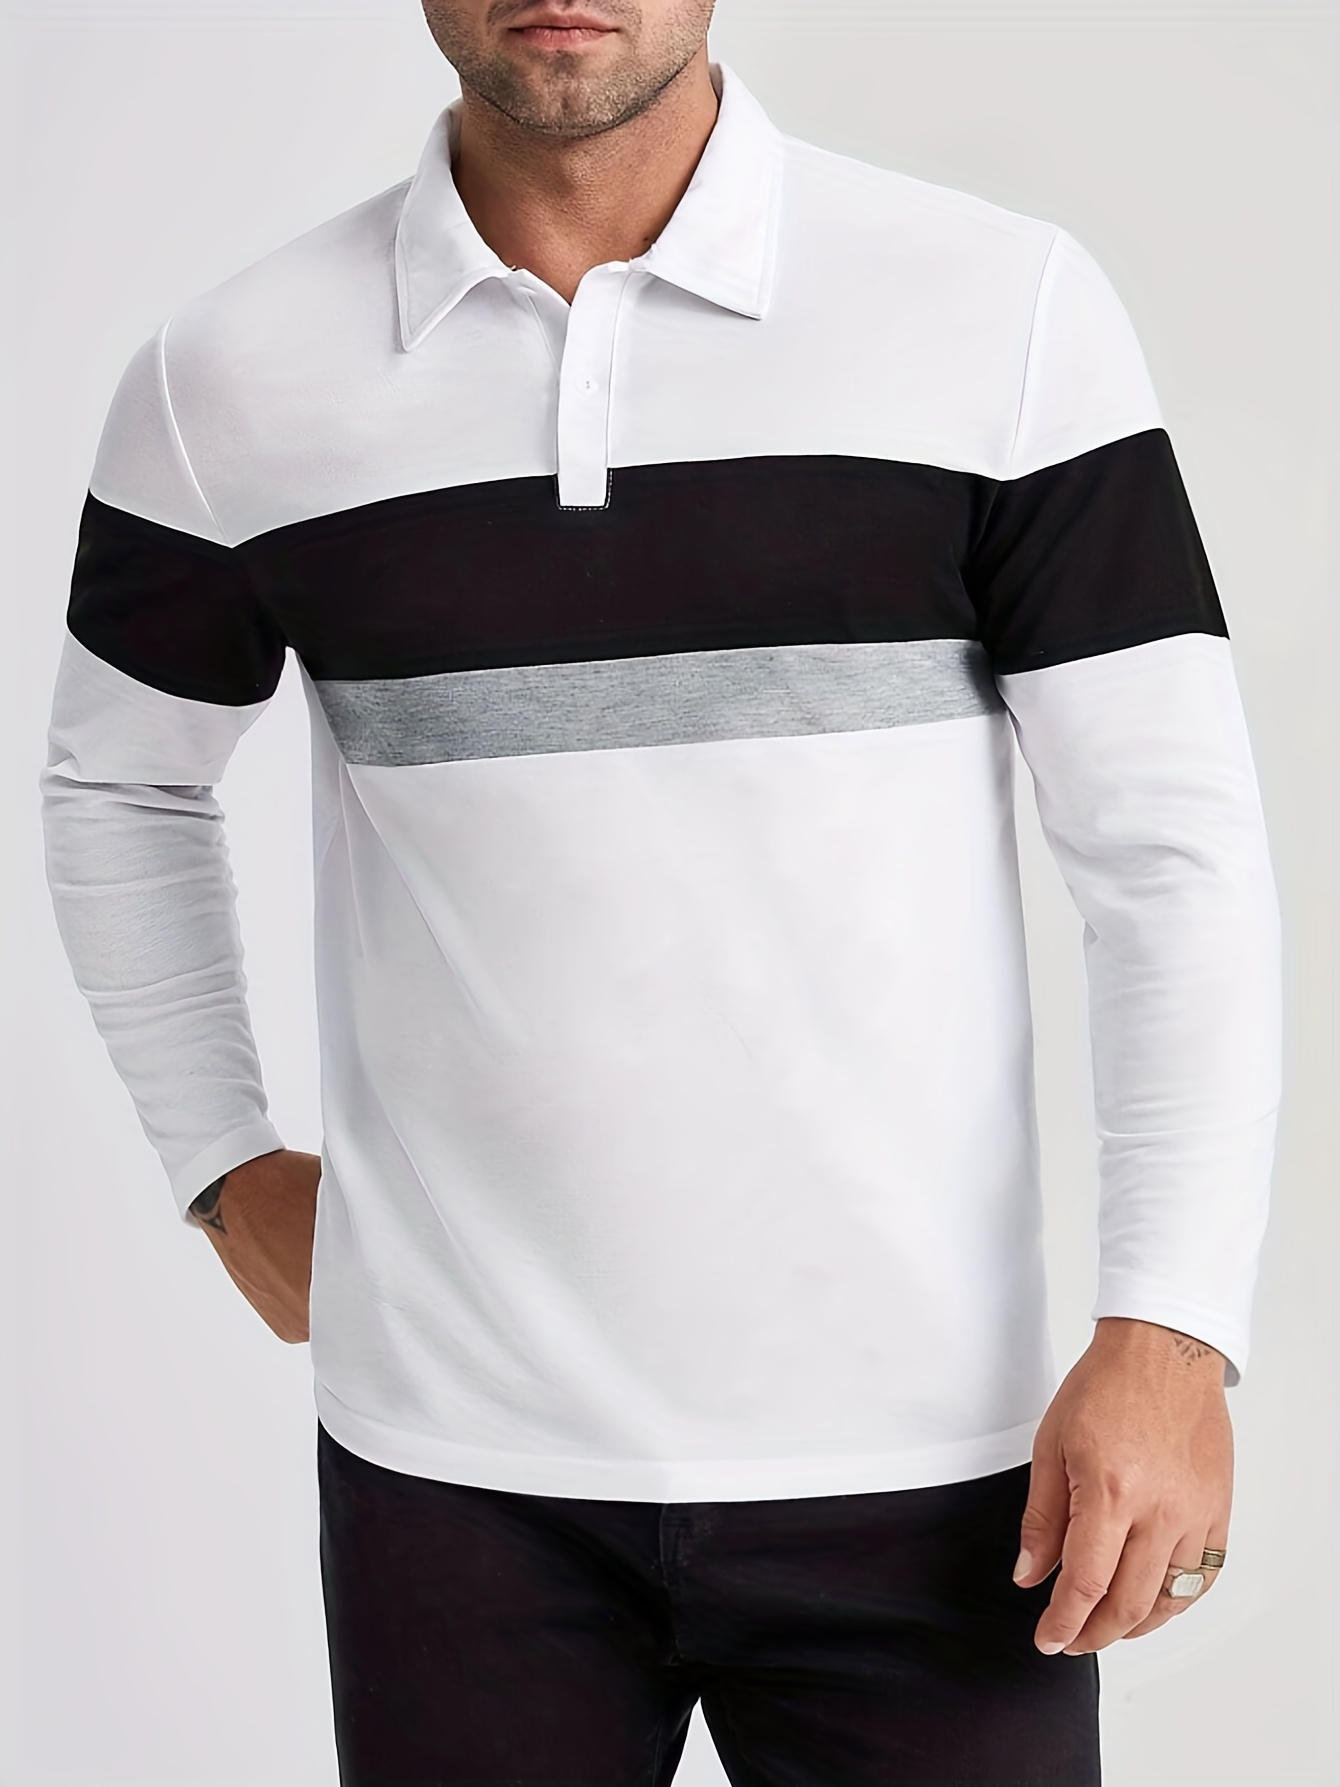 Polo Shirt Adult Clothing Gradient Color Block Zip Long Sleeve